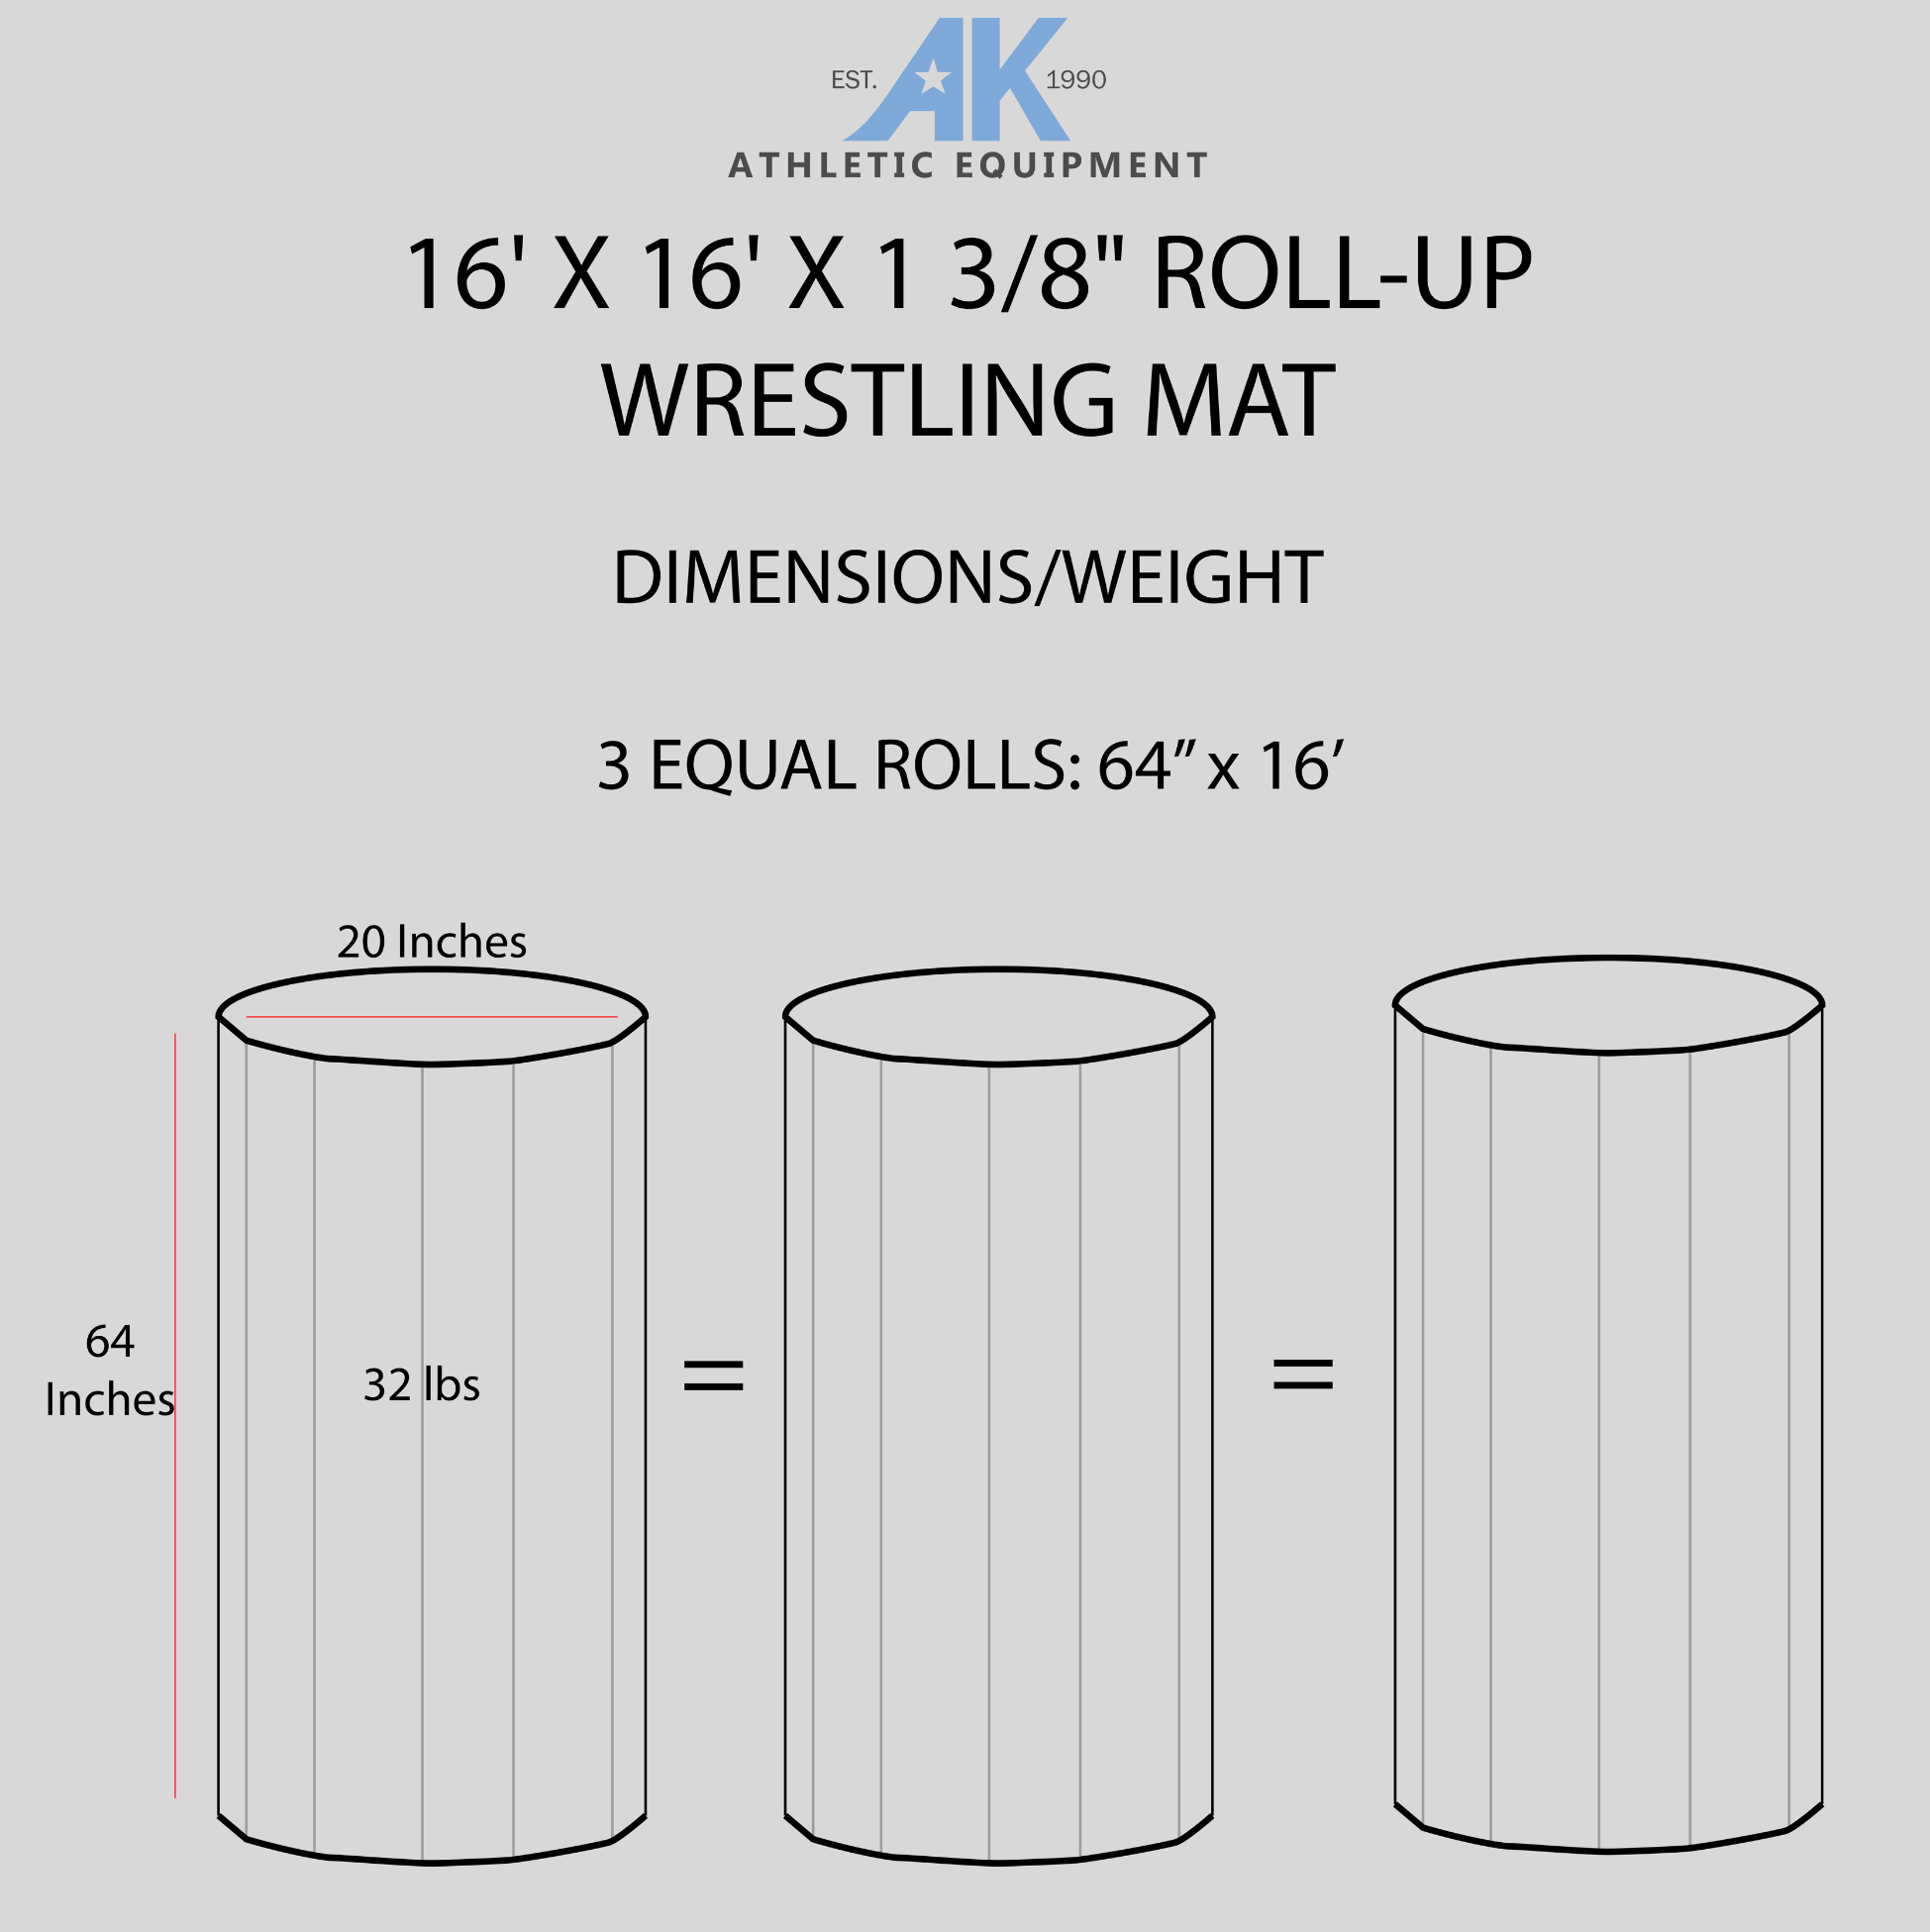 Rolling up and storing AK Athletic Equipment wrestling mats is easy. Our dimensions help customers make the most of our wrestling mat products. 